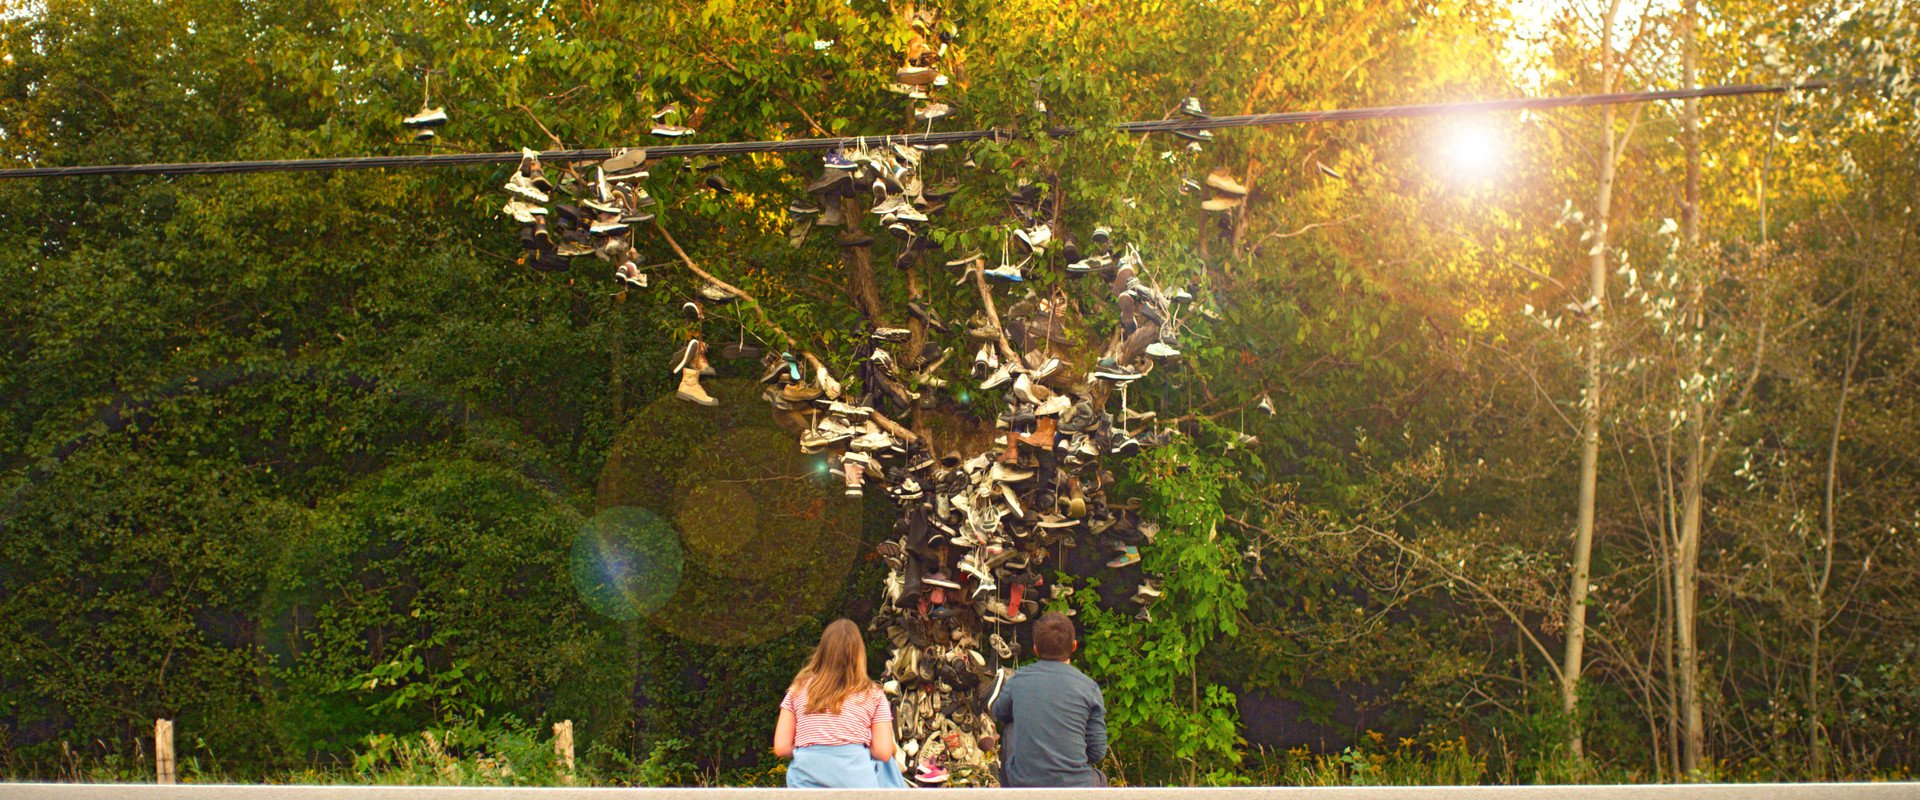 All About Who You Know Shoe Tree.jpg